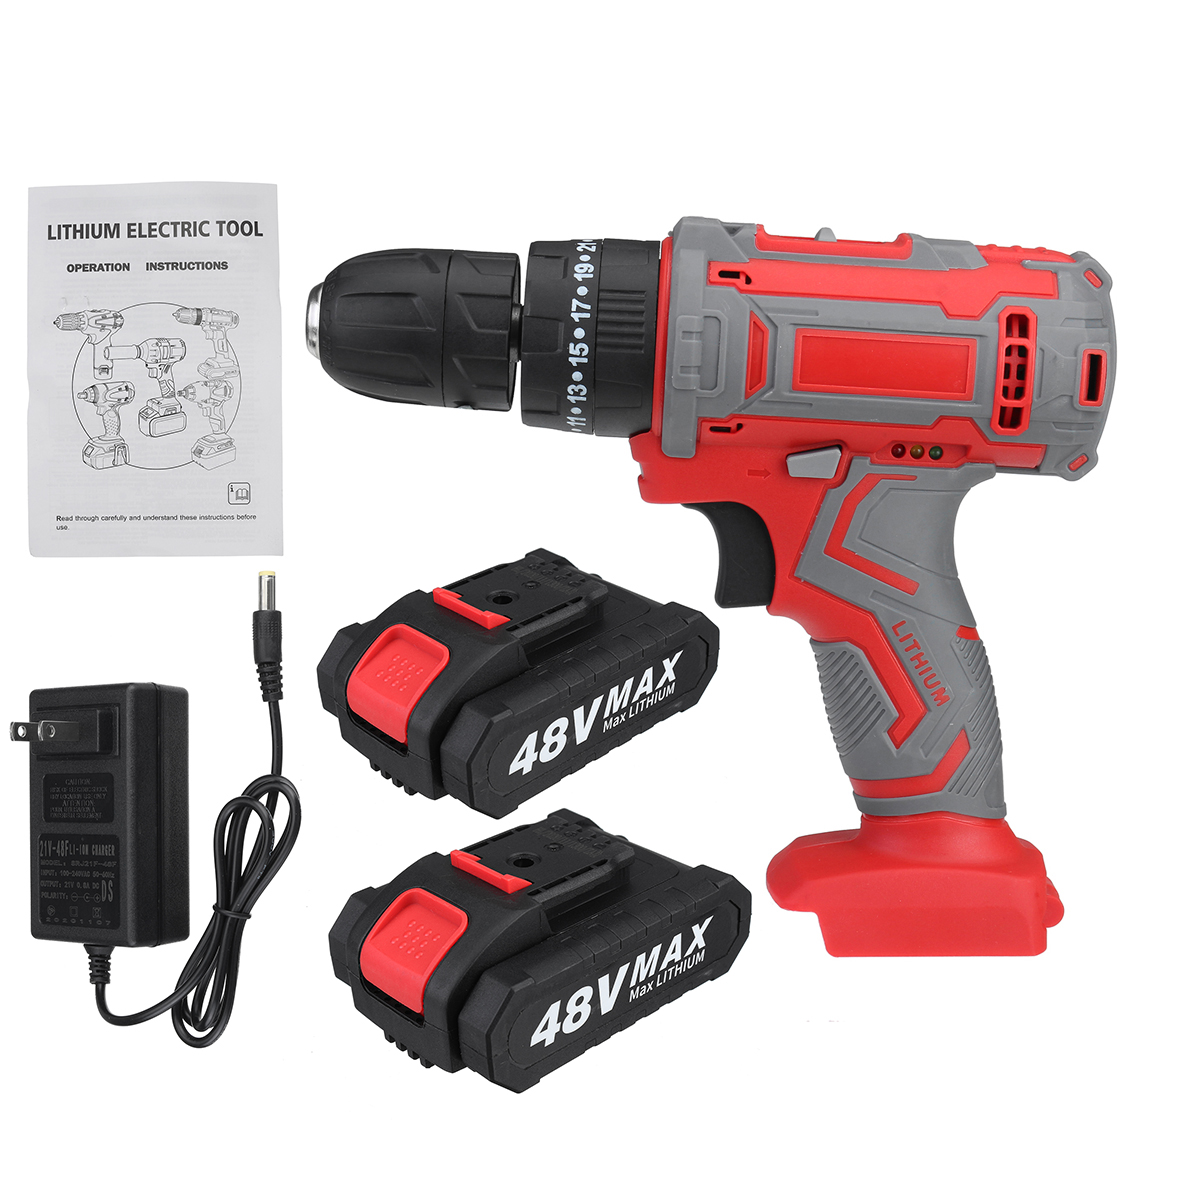 48V-Cordless-Electric-Drill-Tool-Kits-Rechargeable-Dual-Speed-3-Stages-Power-Drill-W-1pc-or-2pcs-Bat-1784738-1